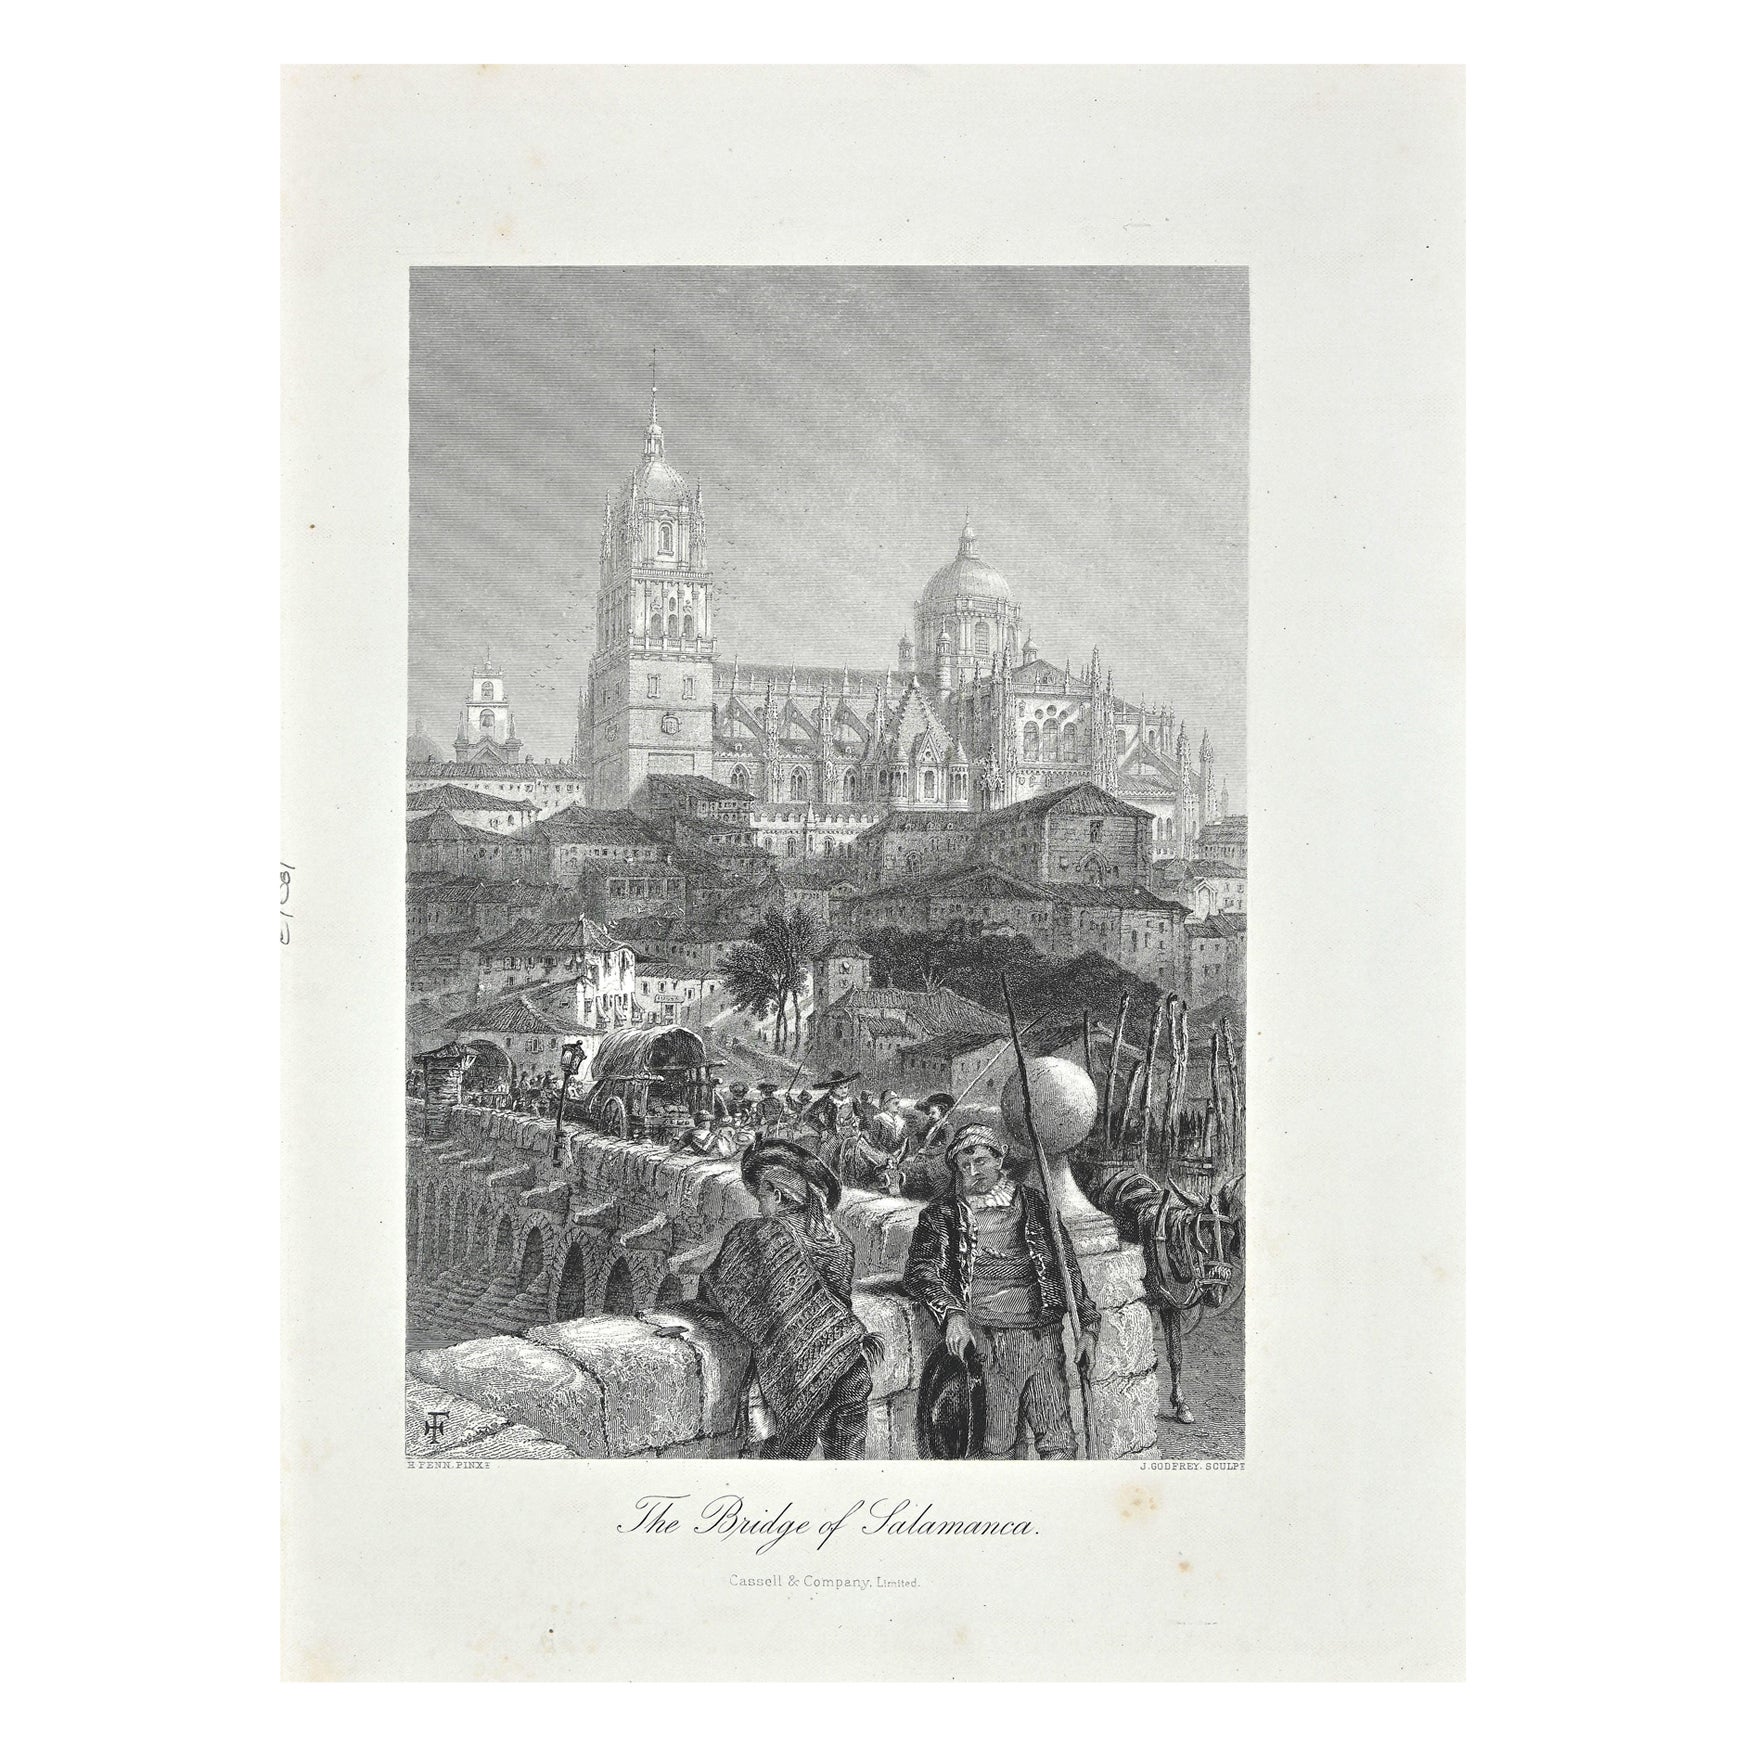 Unknown Figurative Print - The Bridge of Salamanca - Lithograph by J. Goderey - 19th Century